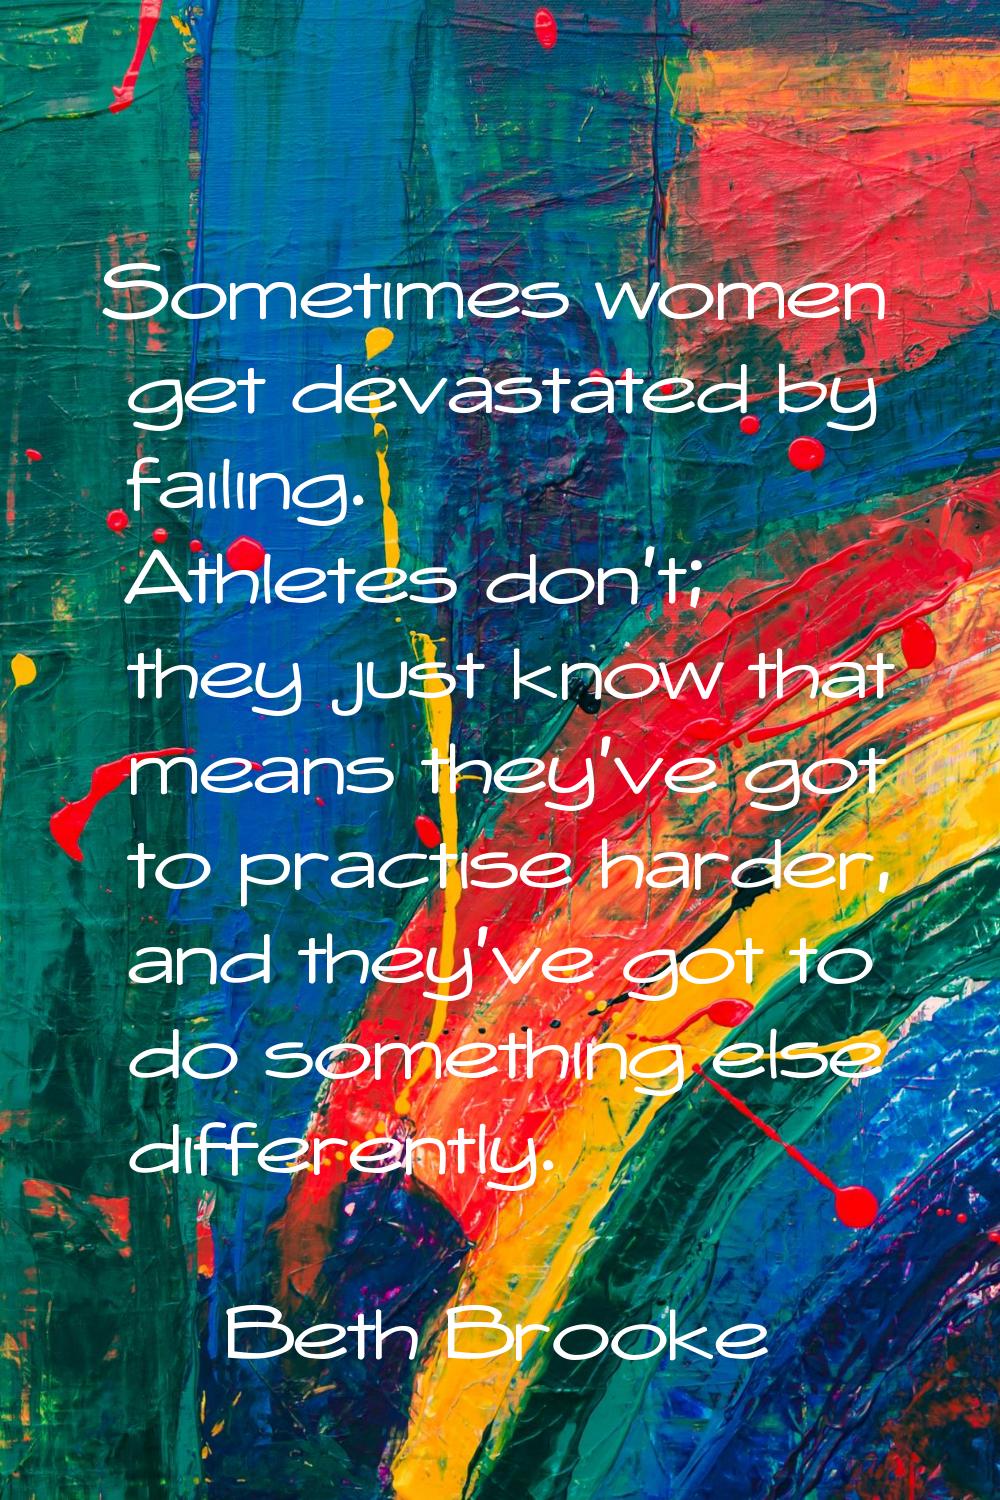 Sometimes women get devastated by failing. Athletes don't; they just know that means they've got to